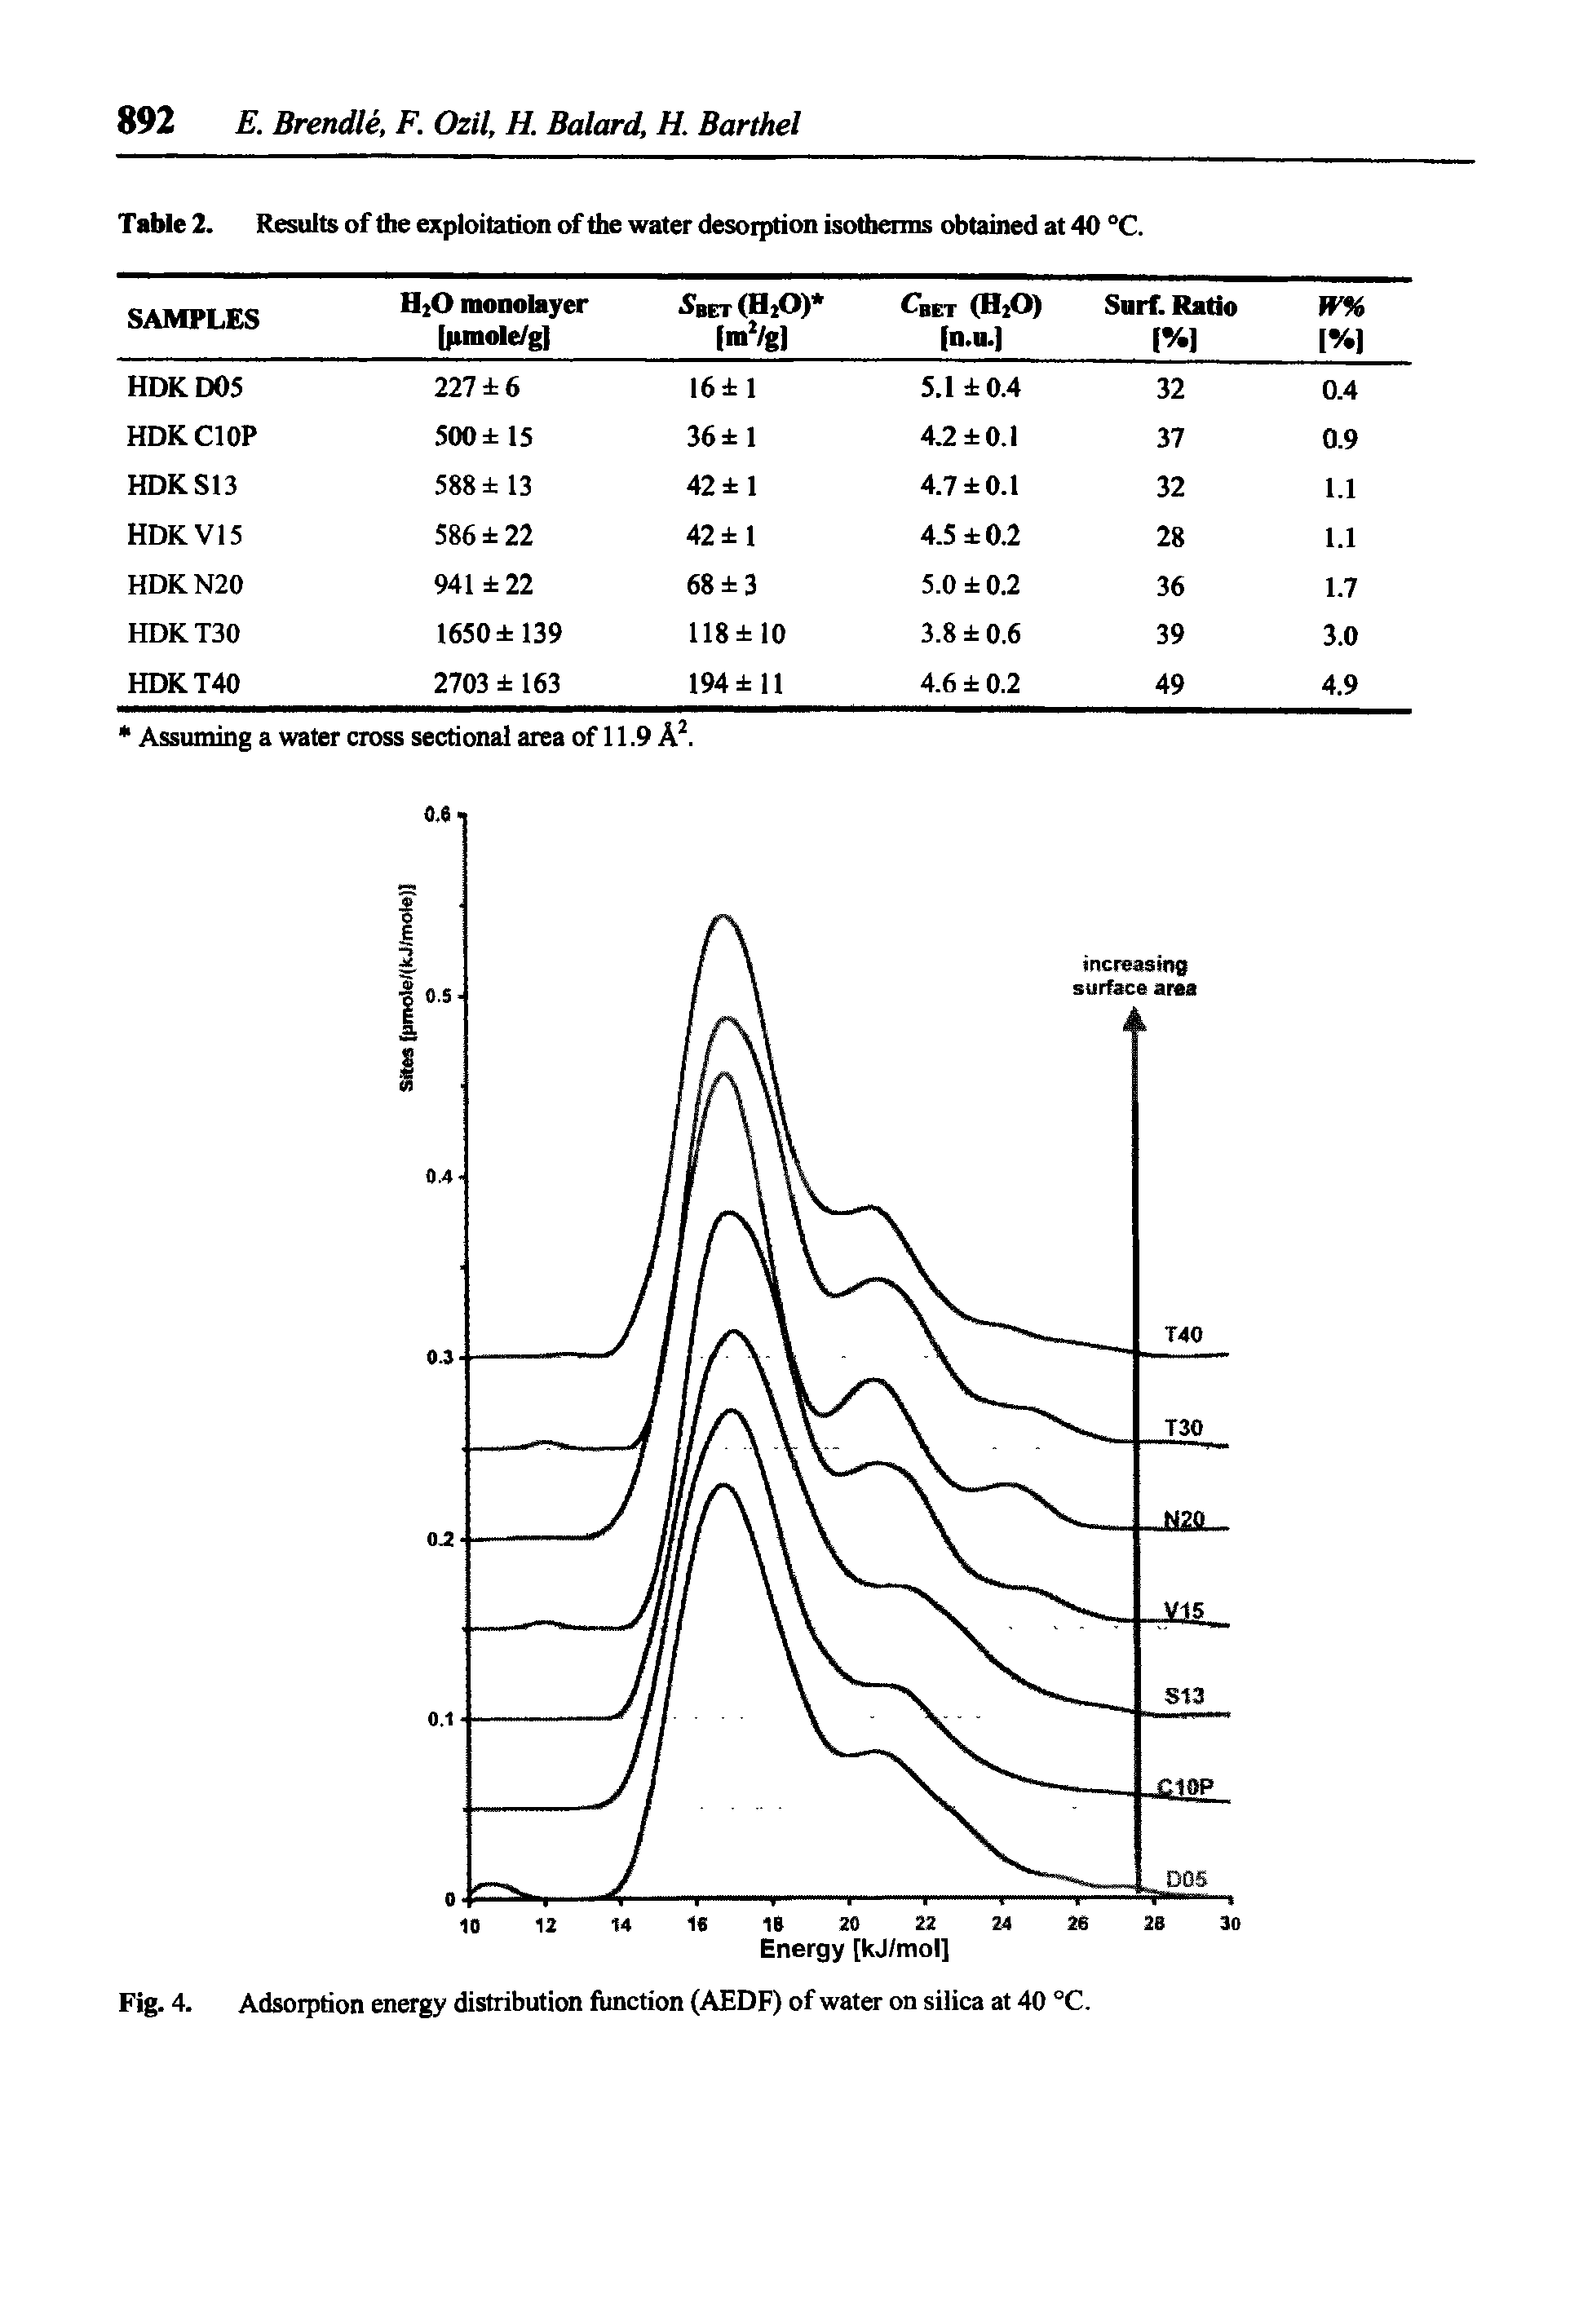 Fig. 4. Adsorption energy distribution function (AEDF) of water on silica at 40 °C.